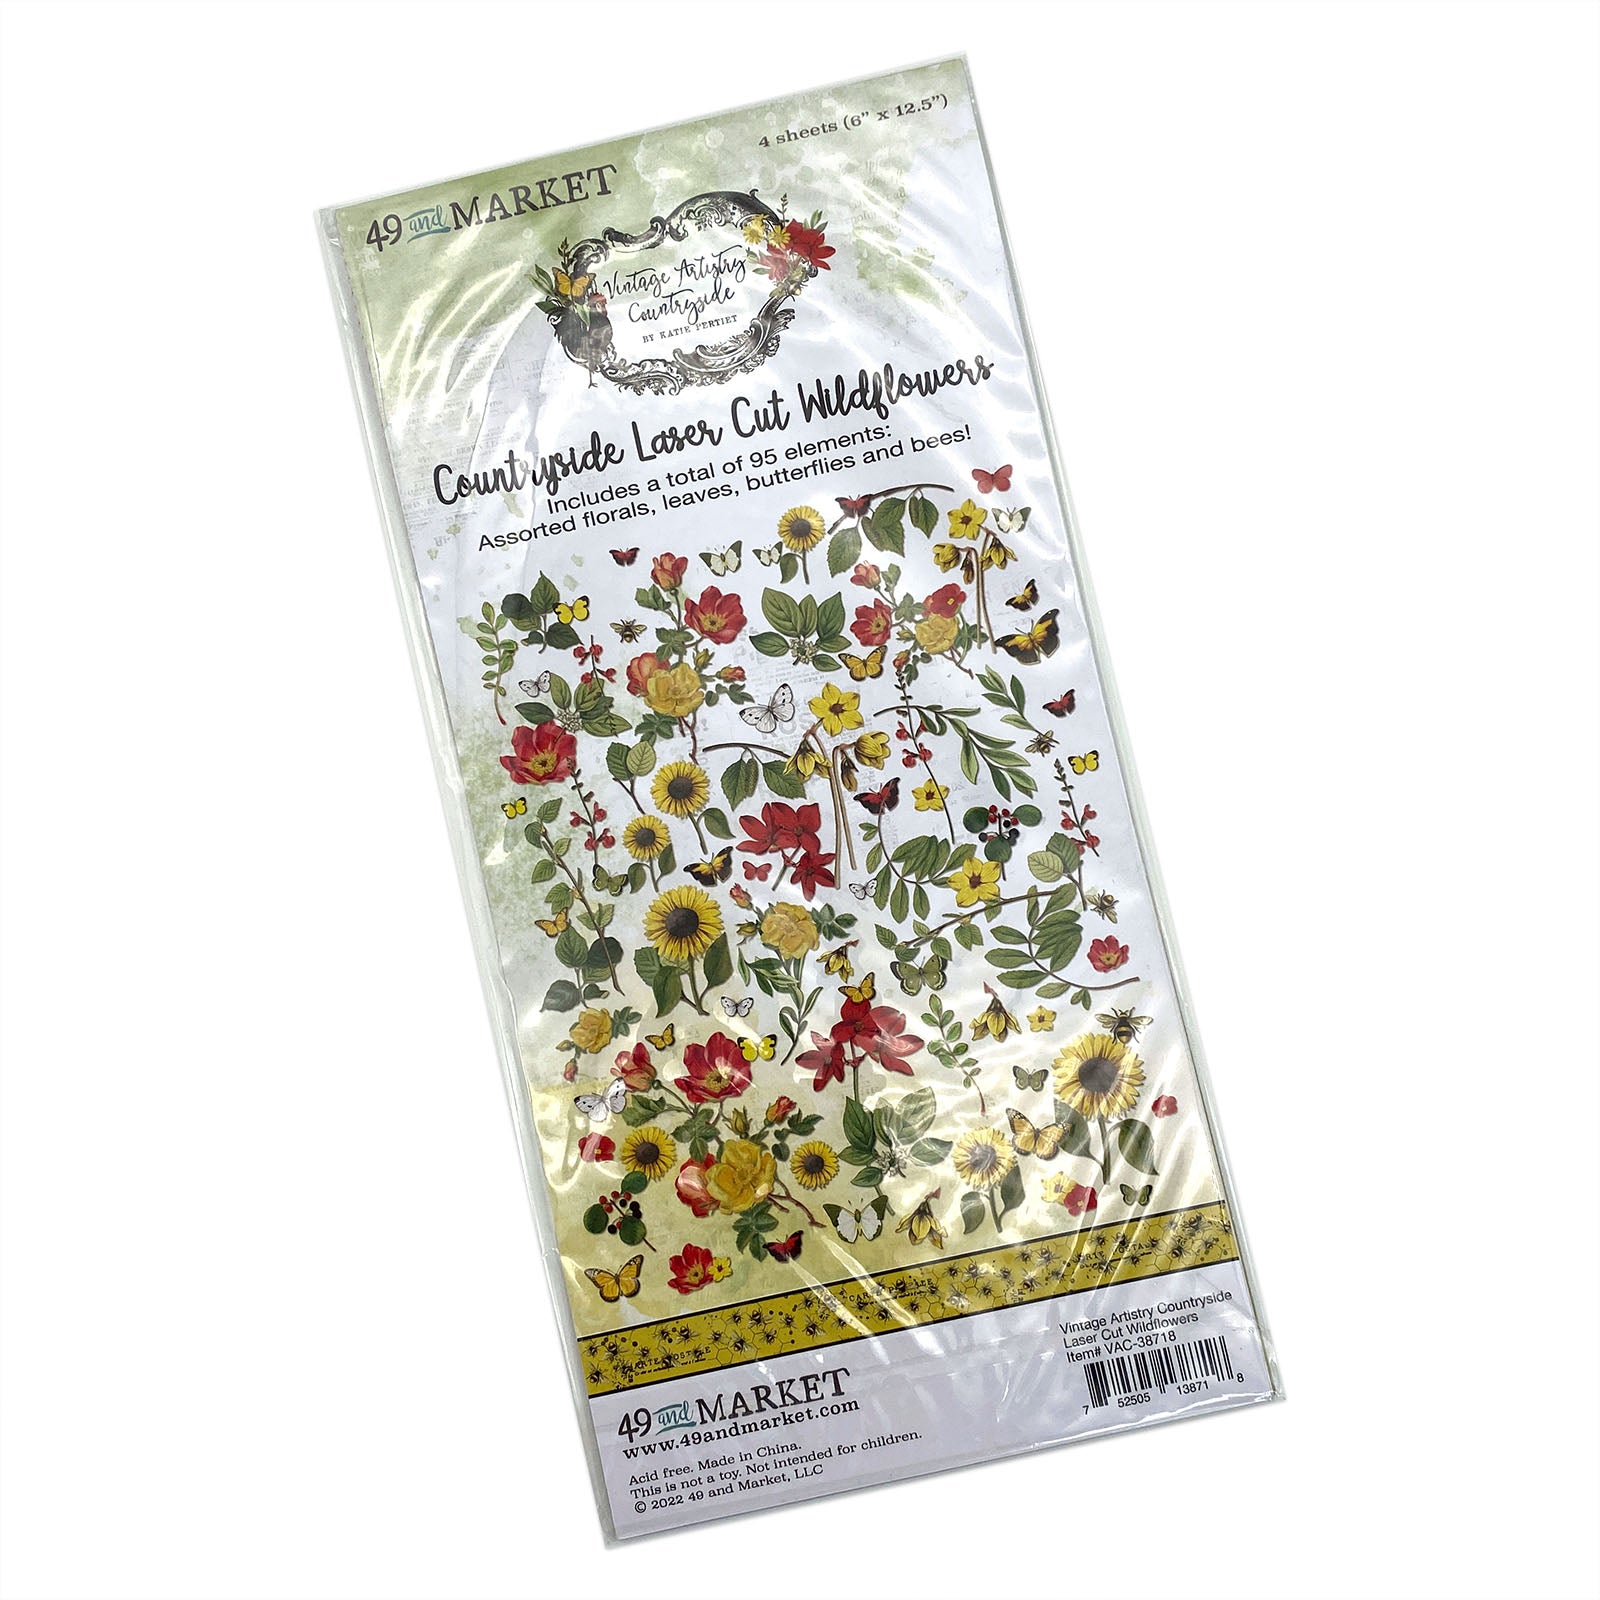 49 and Market-Vintage Artistry-Countryside Laser Cut Wildflowers